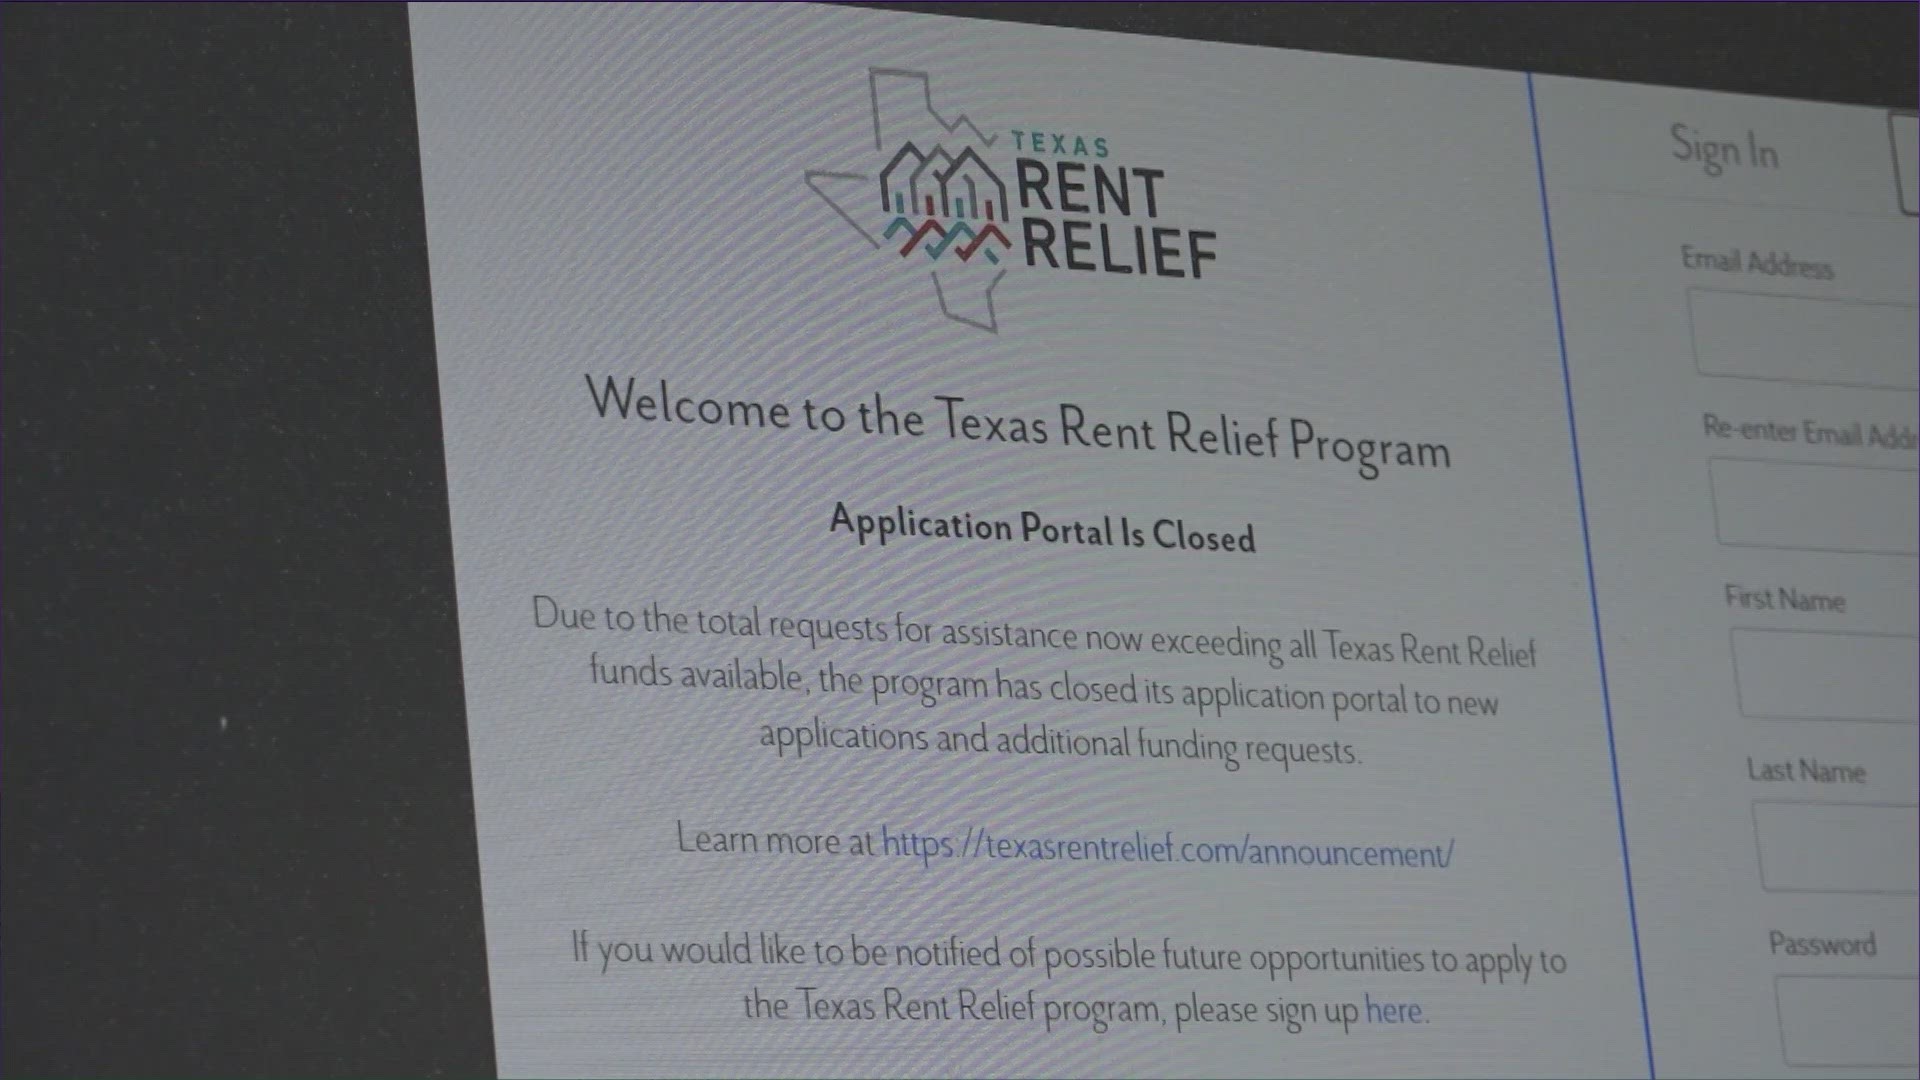 The Texas Rent Relief program opened an online portal on Tuesday, and spots are filling up fast.